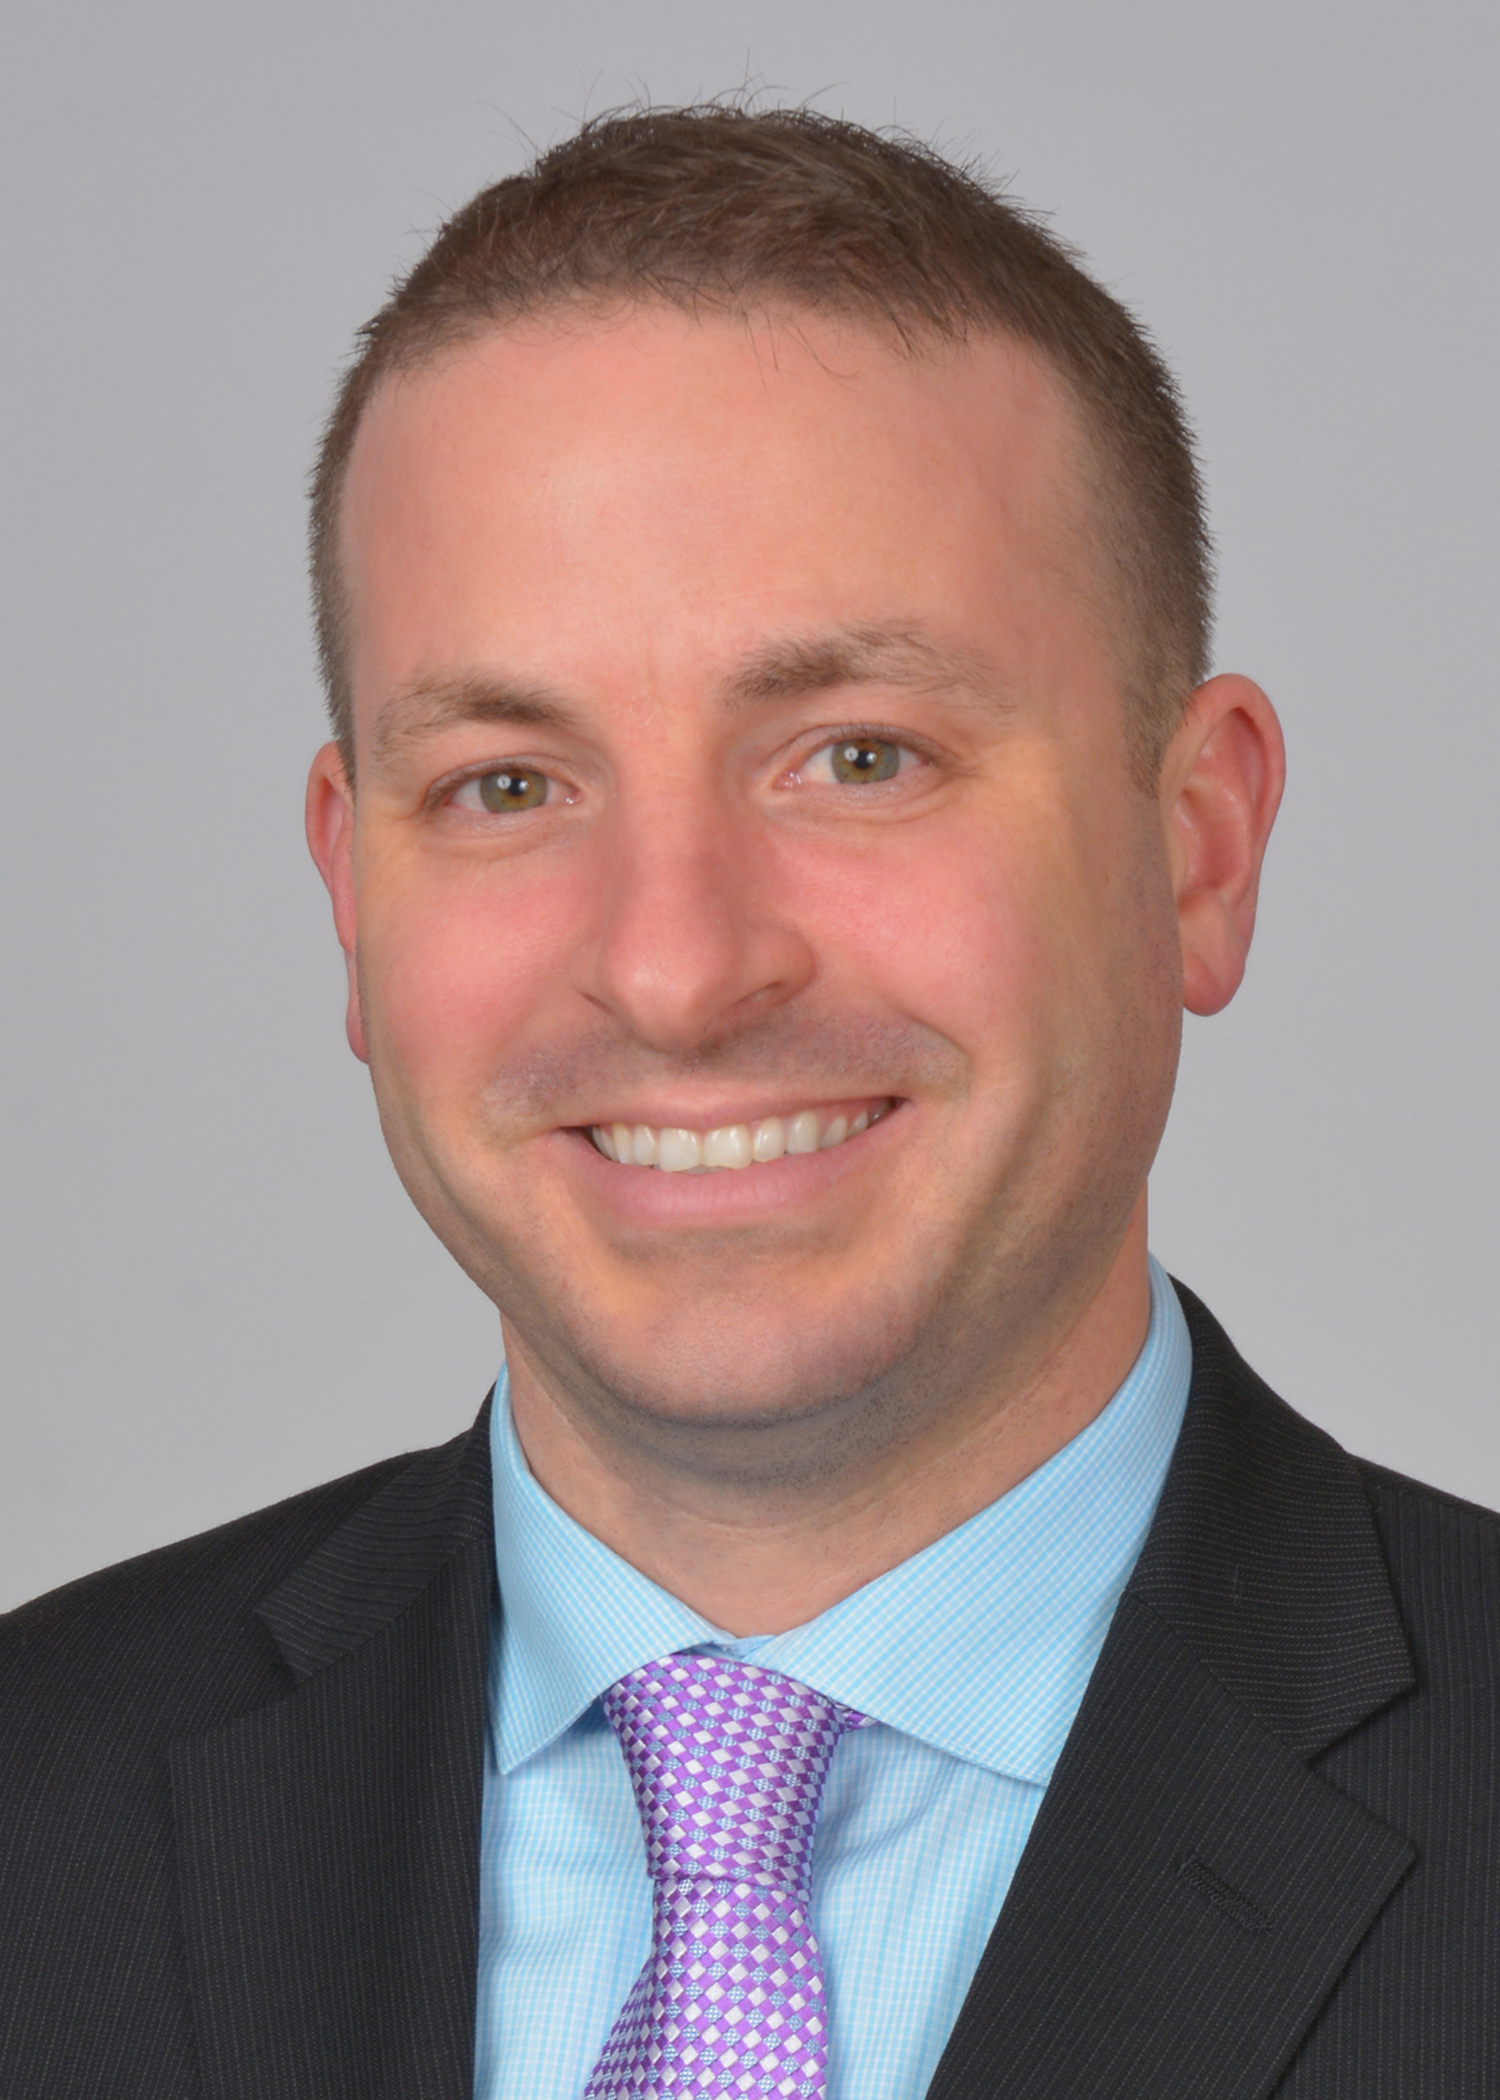 Robert Bilodeau was hired as senior relationship manager in Wilmington Trust’s Insurance Collateral Solutions Group.